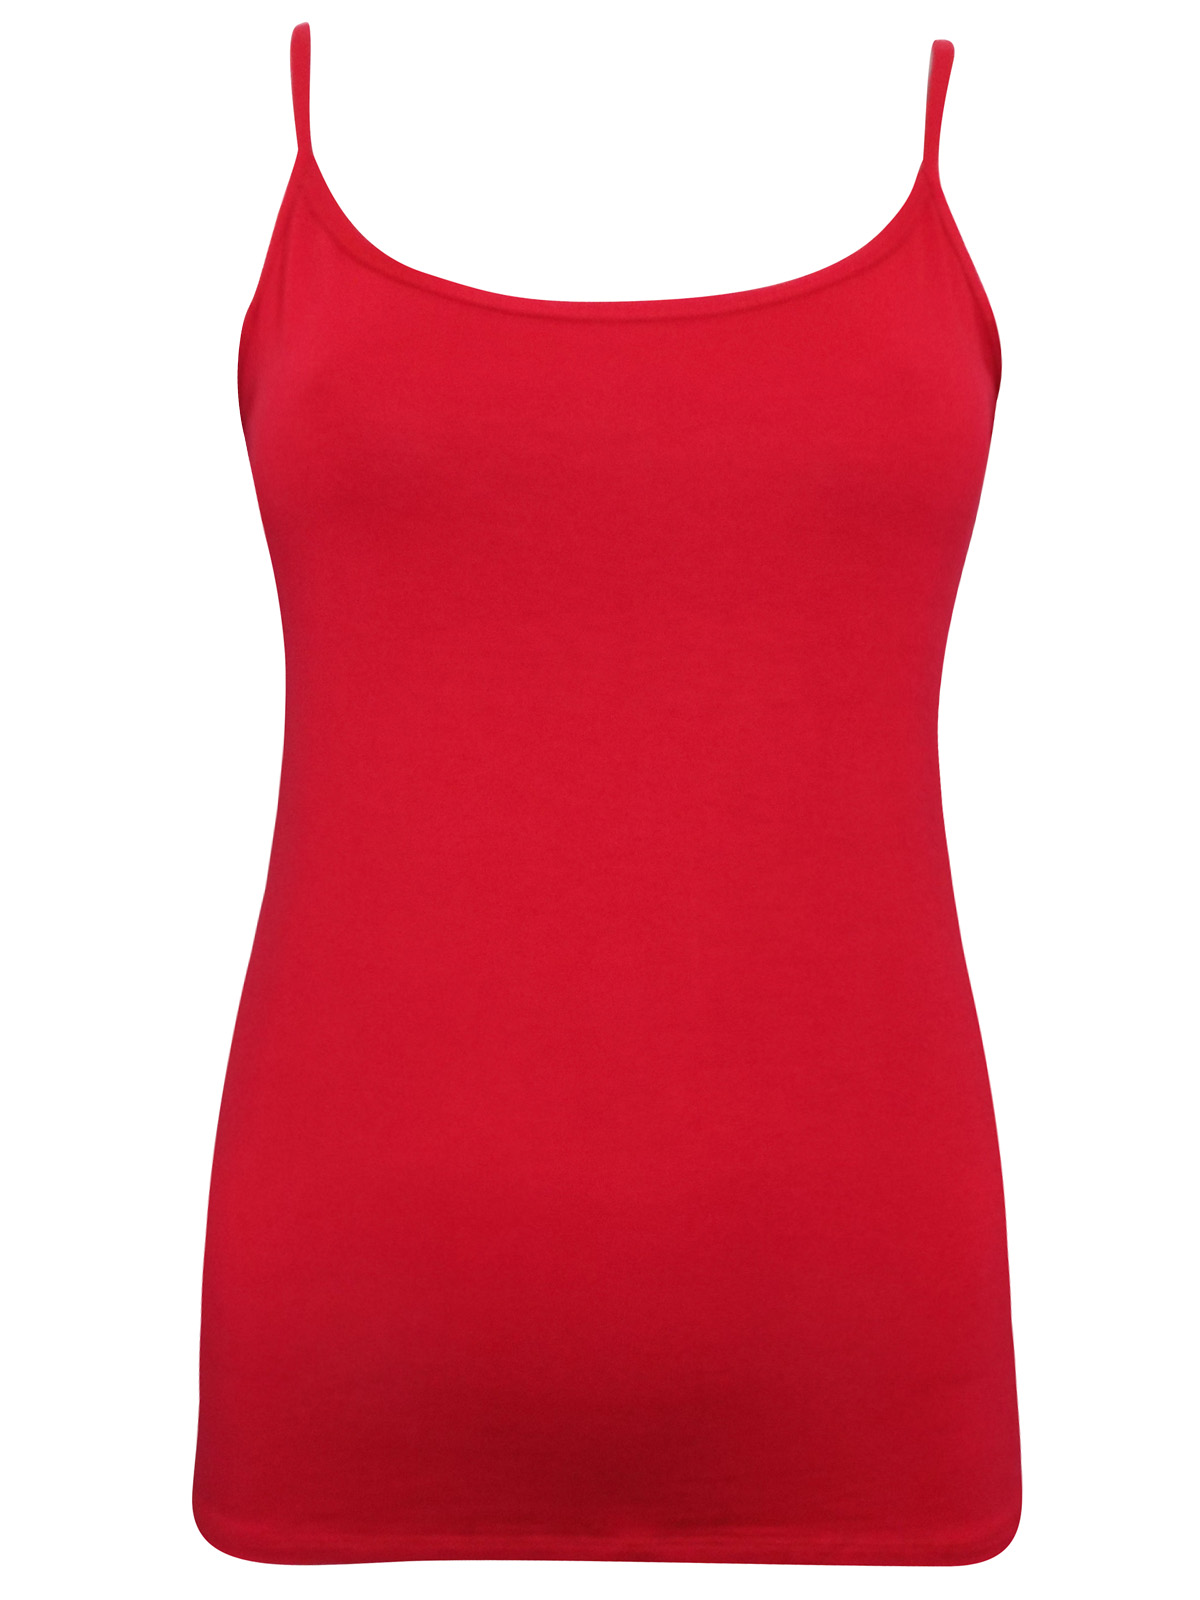 First Avenue RED Sleeveless Jersey Cami Top - Size 10 to 20